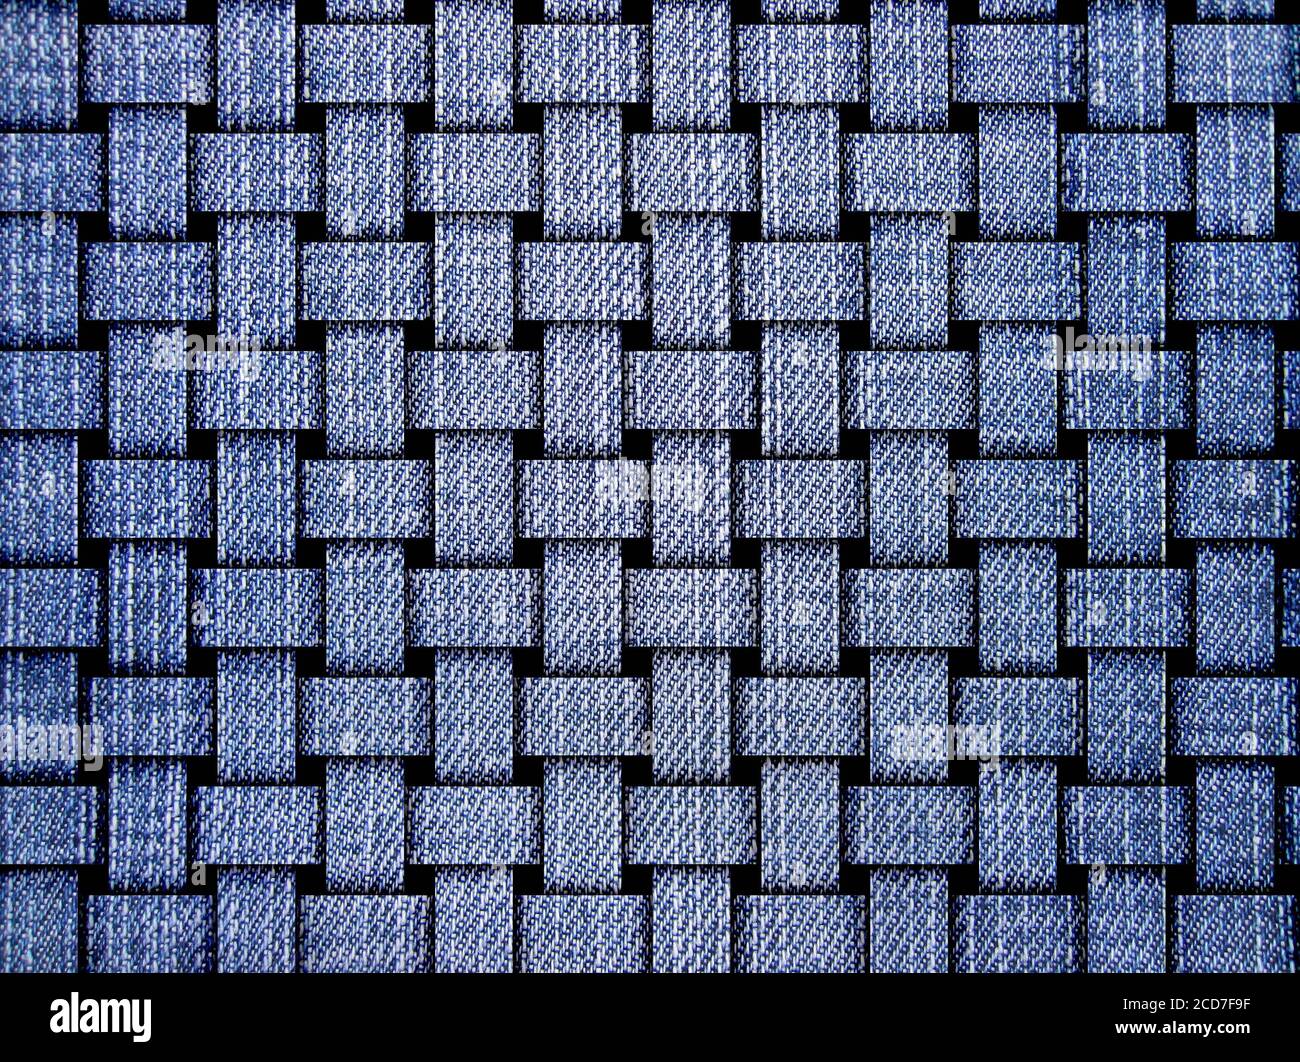 blue jeans fabric as a background Stock Photo